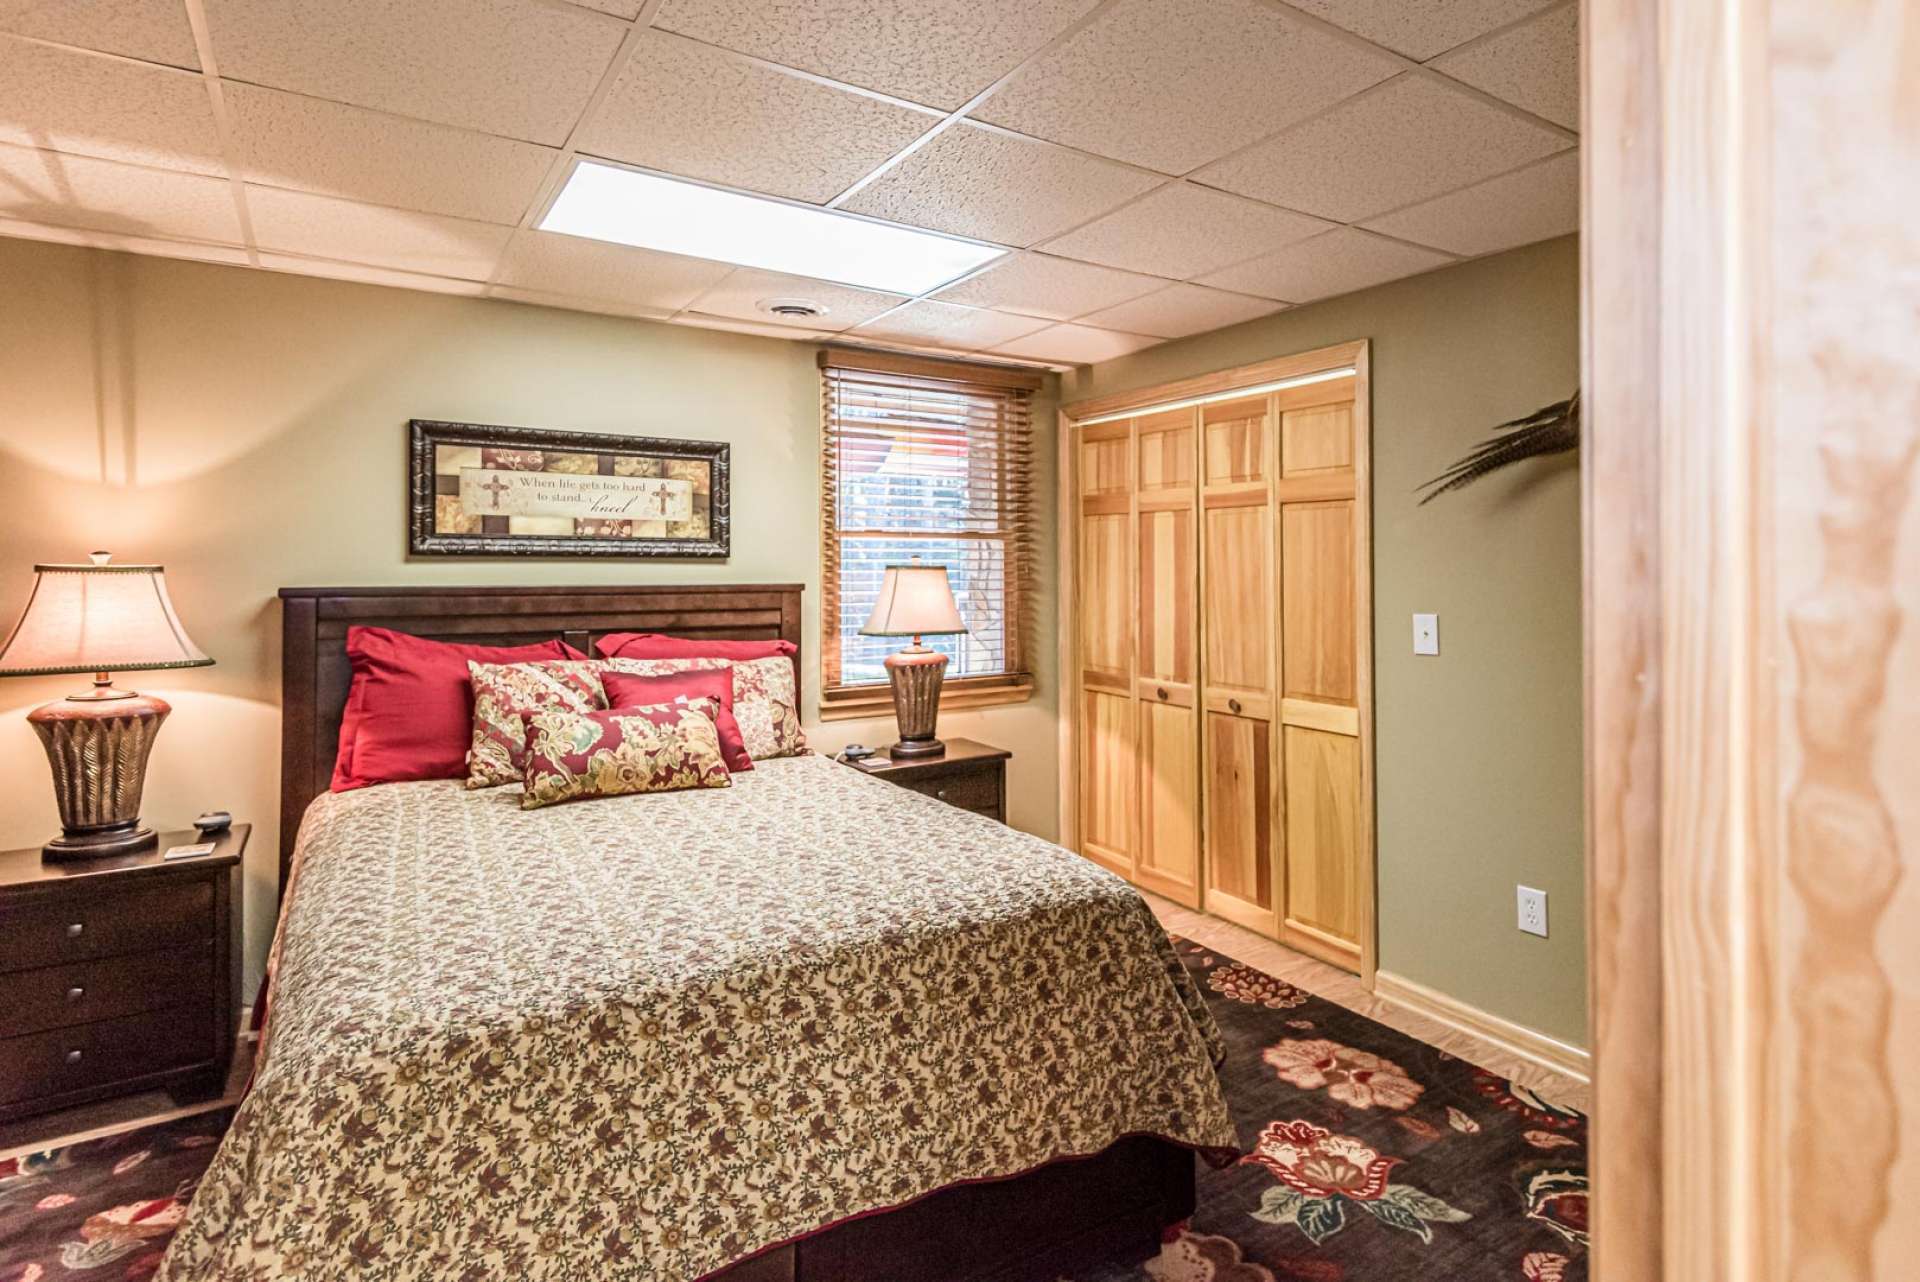 This lower level bedroom features double closets and is nicely sized.